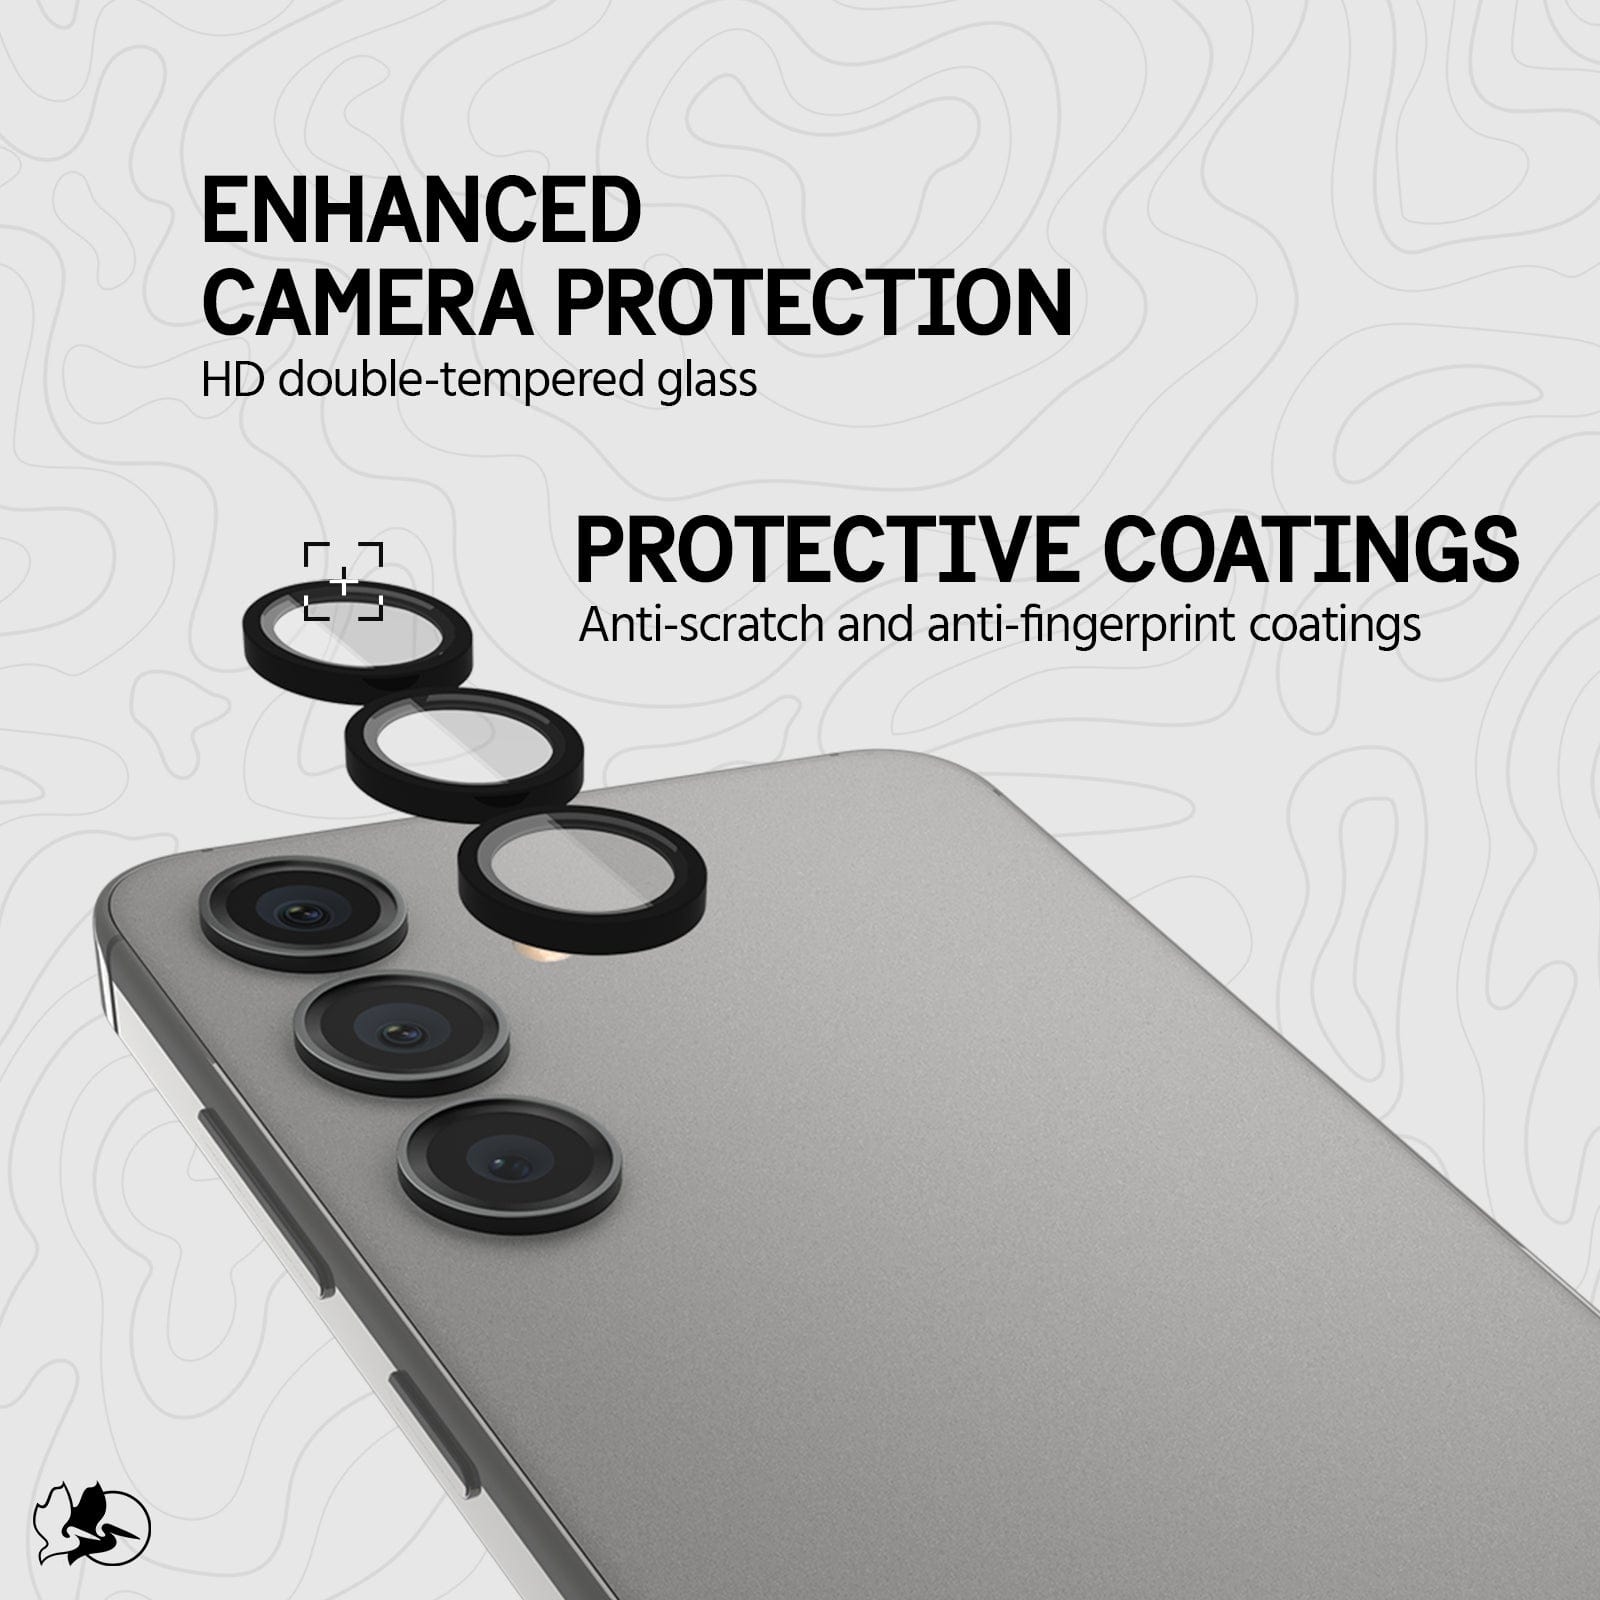 ENHANCED CAMERA PROTECTION. HD DOUBLE TEMPERED GLASS. PROTECTIVE COATINGS ANTI-SCRATCH AND ANTI-FINGERPRINT COATINGS